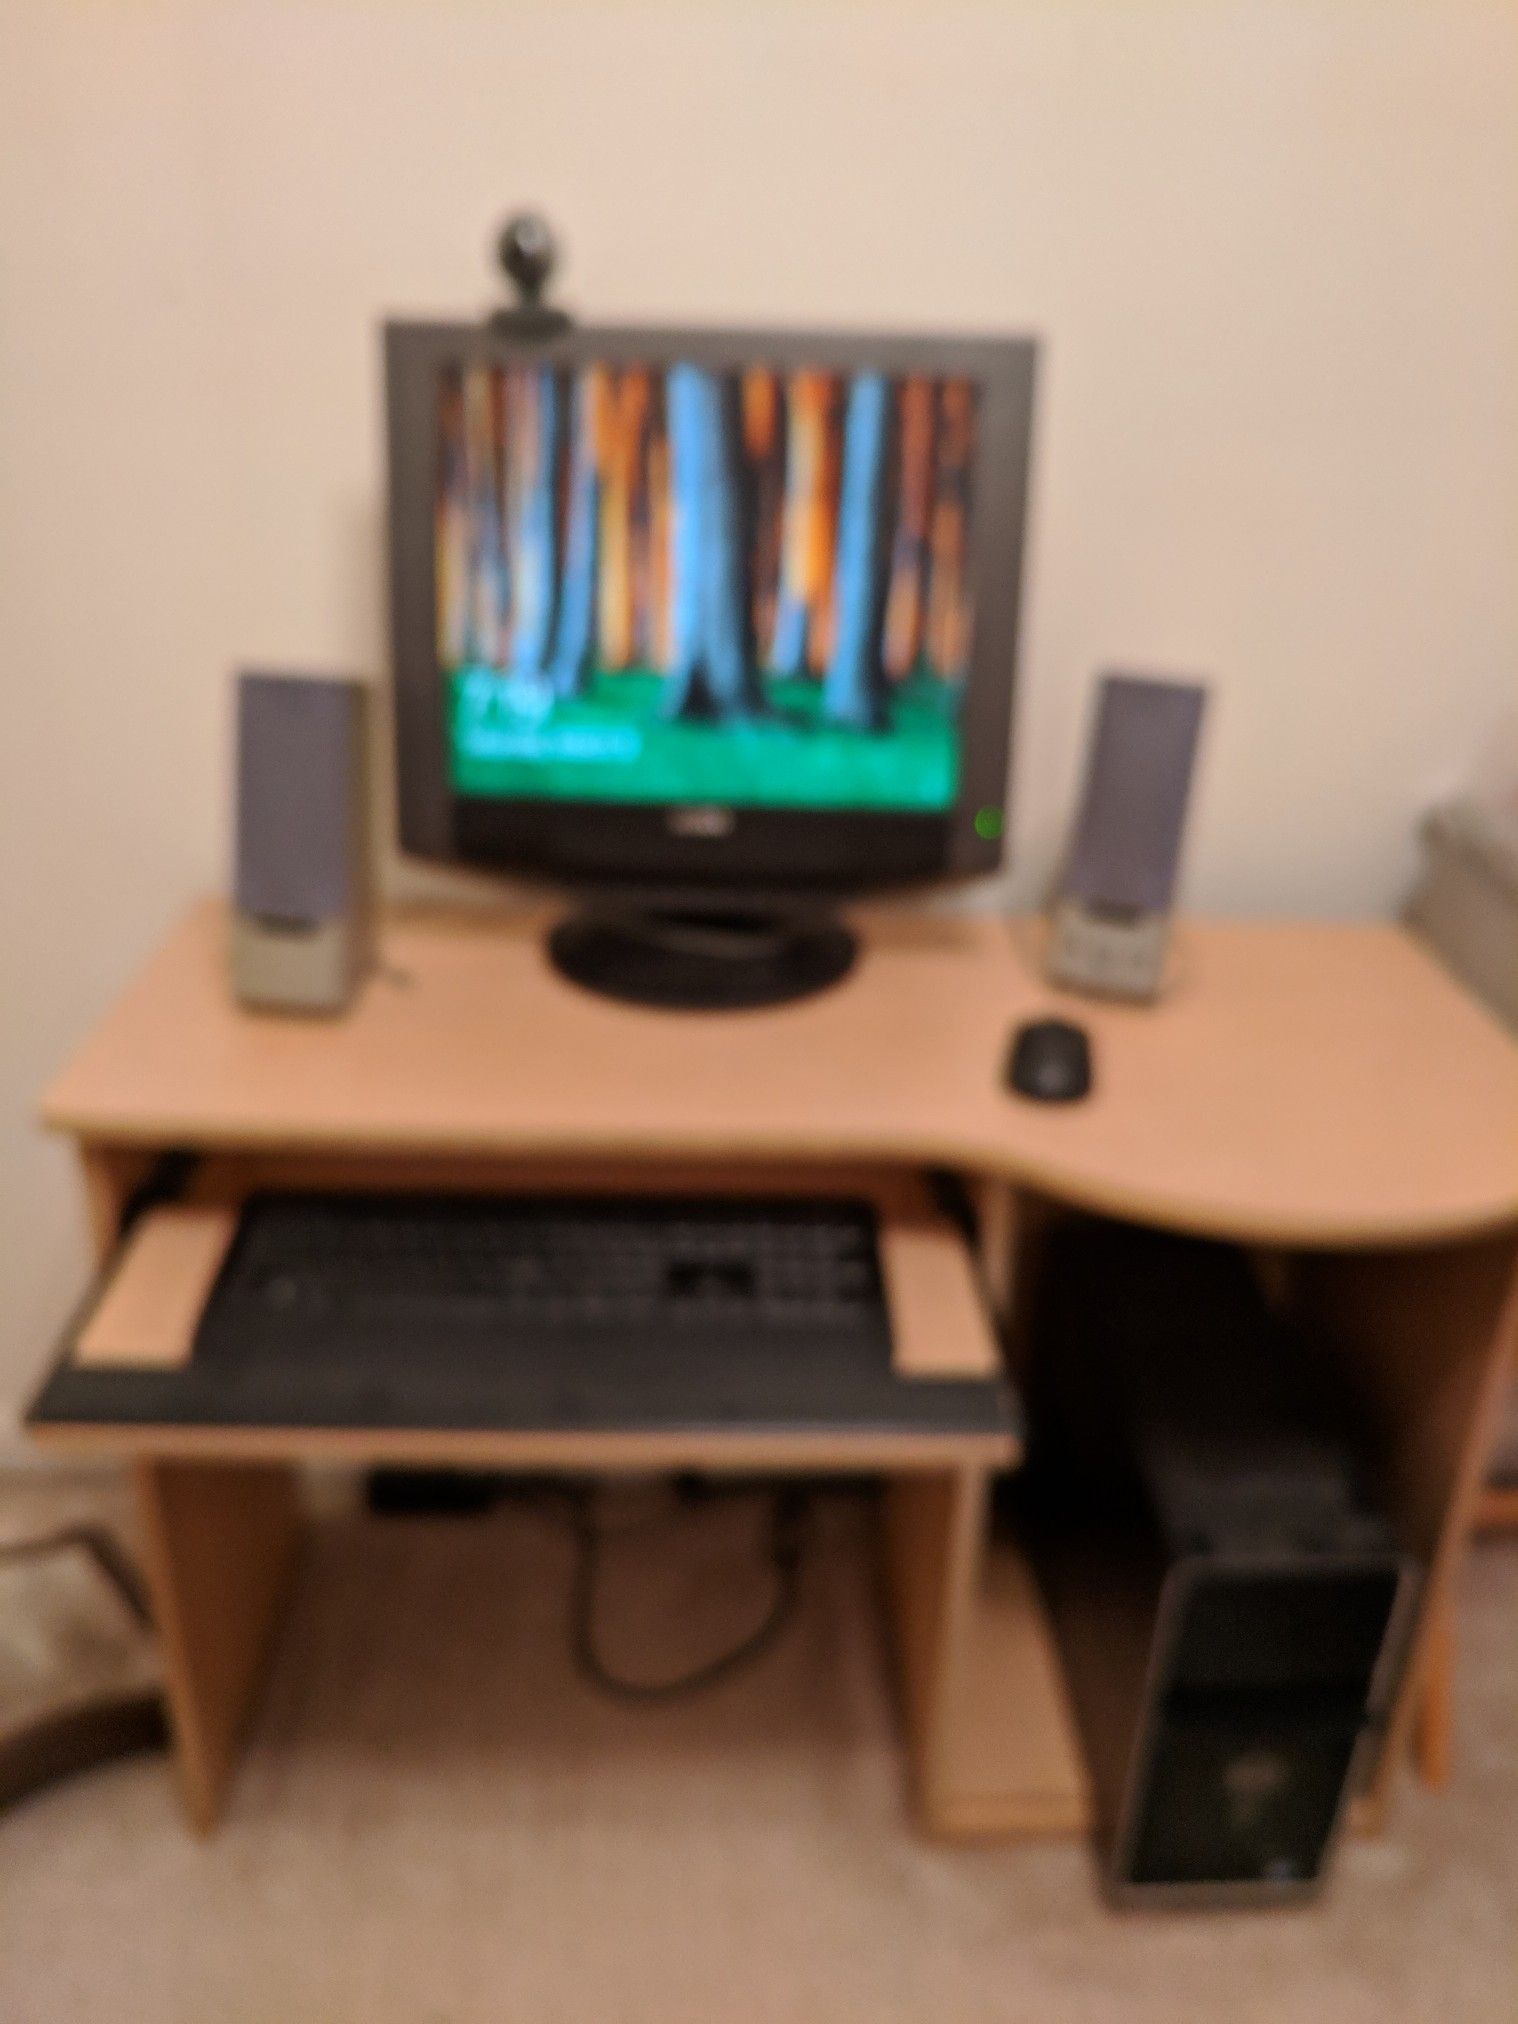 Computer monitor, wireless keyboard and mouse camera and 2 speakers